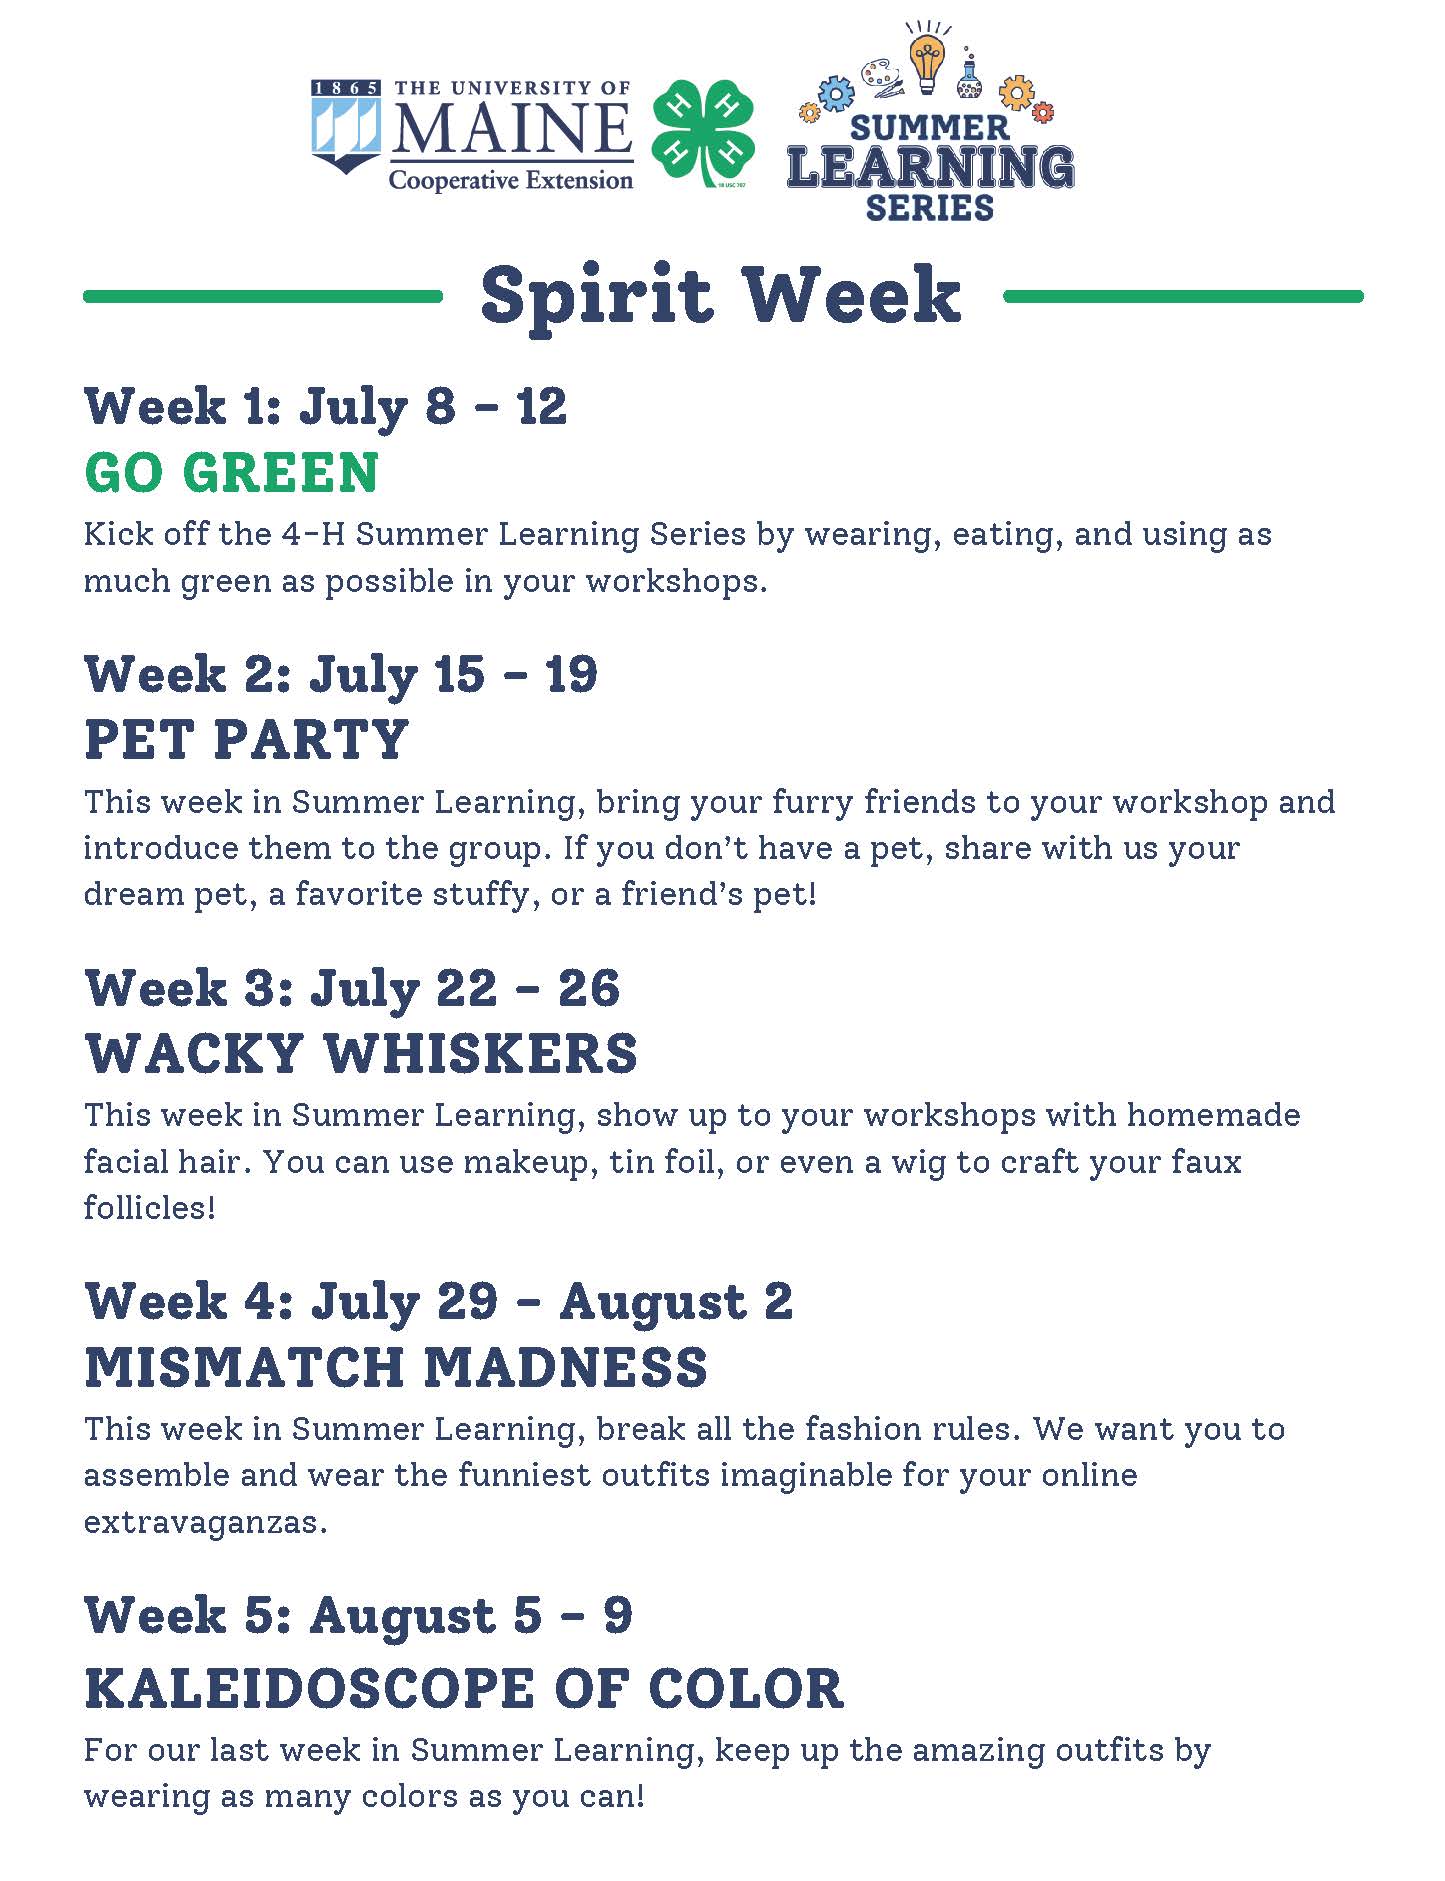 New for 2024, show your 4-H Spirit by participating in the weekly Spirit Themes!

Week 1: July 8 - 12, Go Green

Kick off the 4-H Summer Learning Series by wearing, eating, and using as much green as possible in your workshops.

Week 2: July 15 - 19, Pet Party

This week in Summer Learning, bring your furry friends to your workshop and introduce them to the group. If you don’t have a pet, share with us your dream pet, a favorite stuffy, or a friend’s pet!

Week 3: July 22 - 26, Wacky Whiskers

This week in Summer Learning, show up to your workshops with homemade facial hair. You can use makeup, tin foil, or even a wig to craft your faux follicles!

Week 4: July 29 - August 2, Mismatch Madness

This week in Summer Learning, break all the fashion rules. We want you to assemble and wear the funniest outfits imaginable for your online extravaganzas.

Week 5: August 5 - 9, Kaleidoscope of Color

For our last week in Summer Learning, keep up the amazing outfits by wearing as many colors as you can!